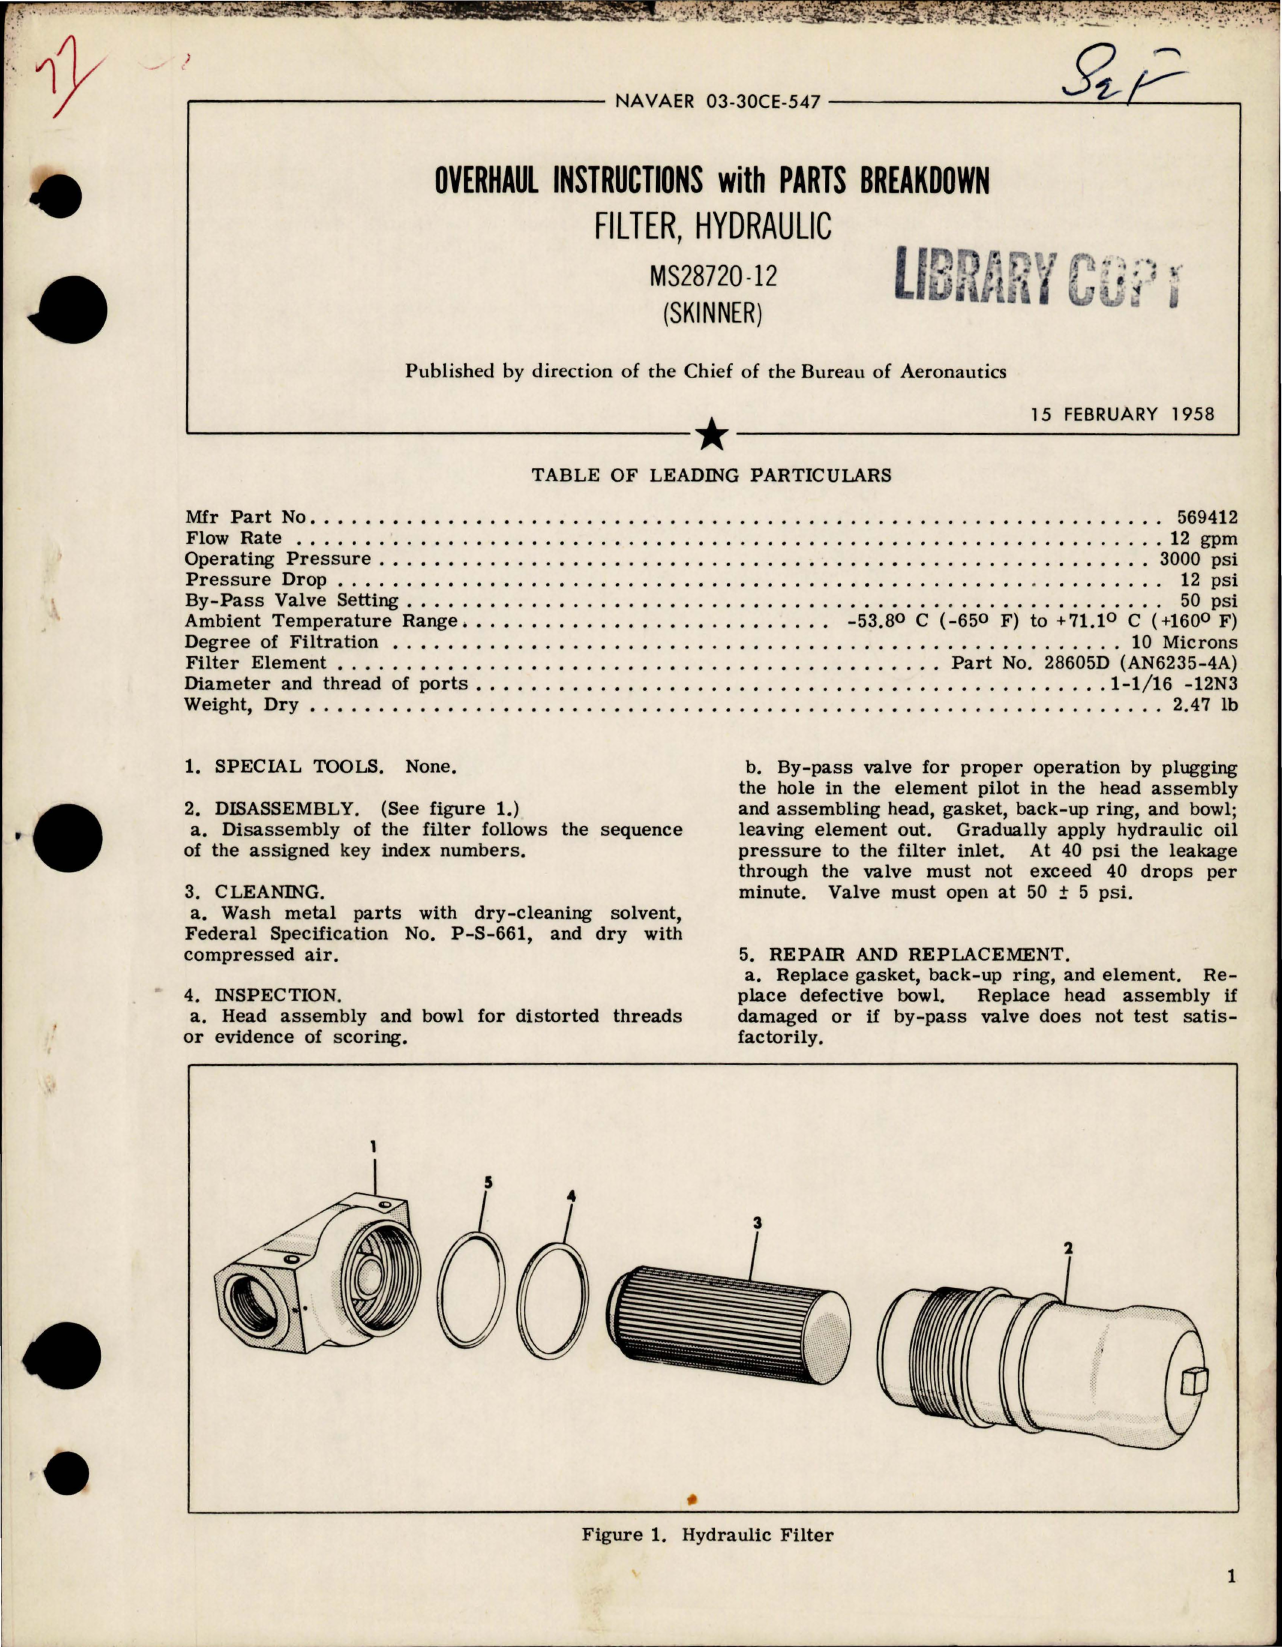 Sample page 1 from AirCorps Library document: Overhaul Instructions with Parts Breakdown for Hydraulic Filter - MS28720-12